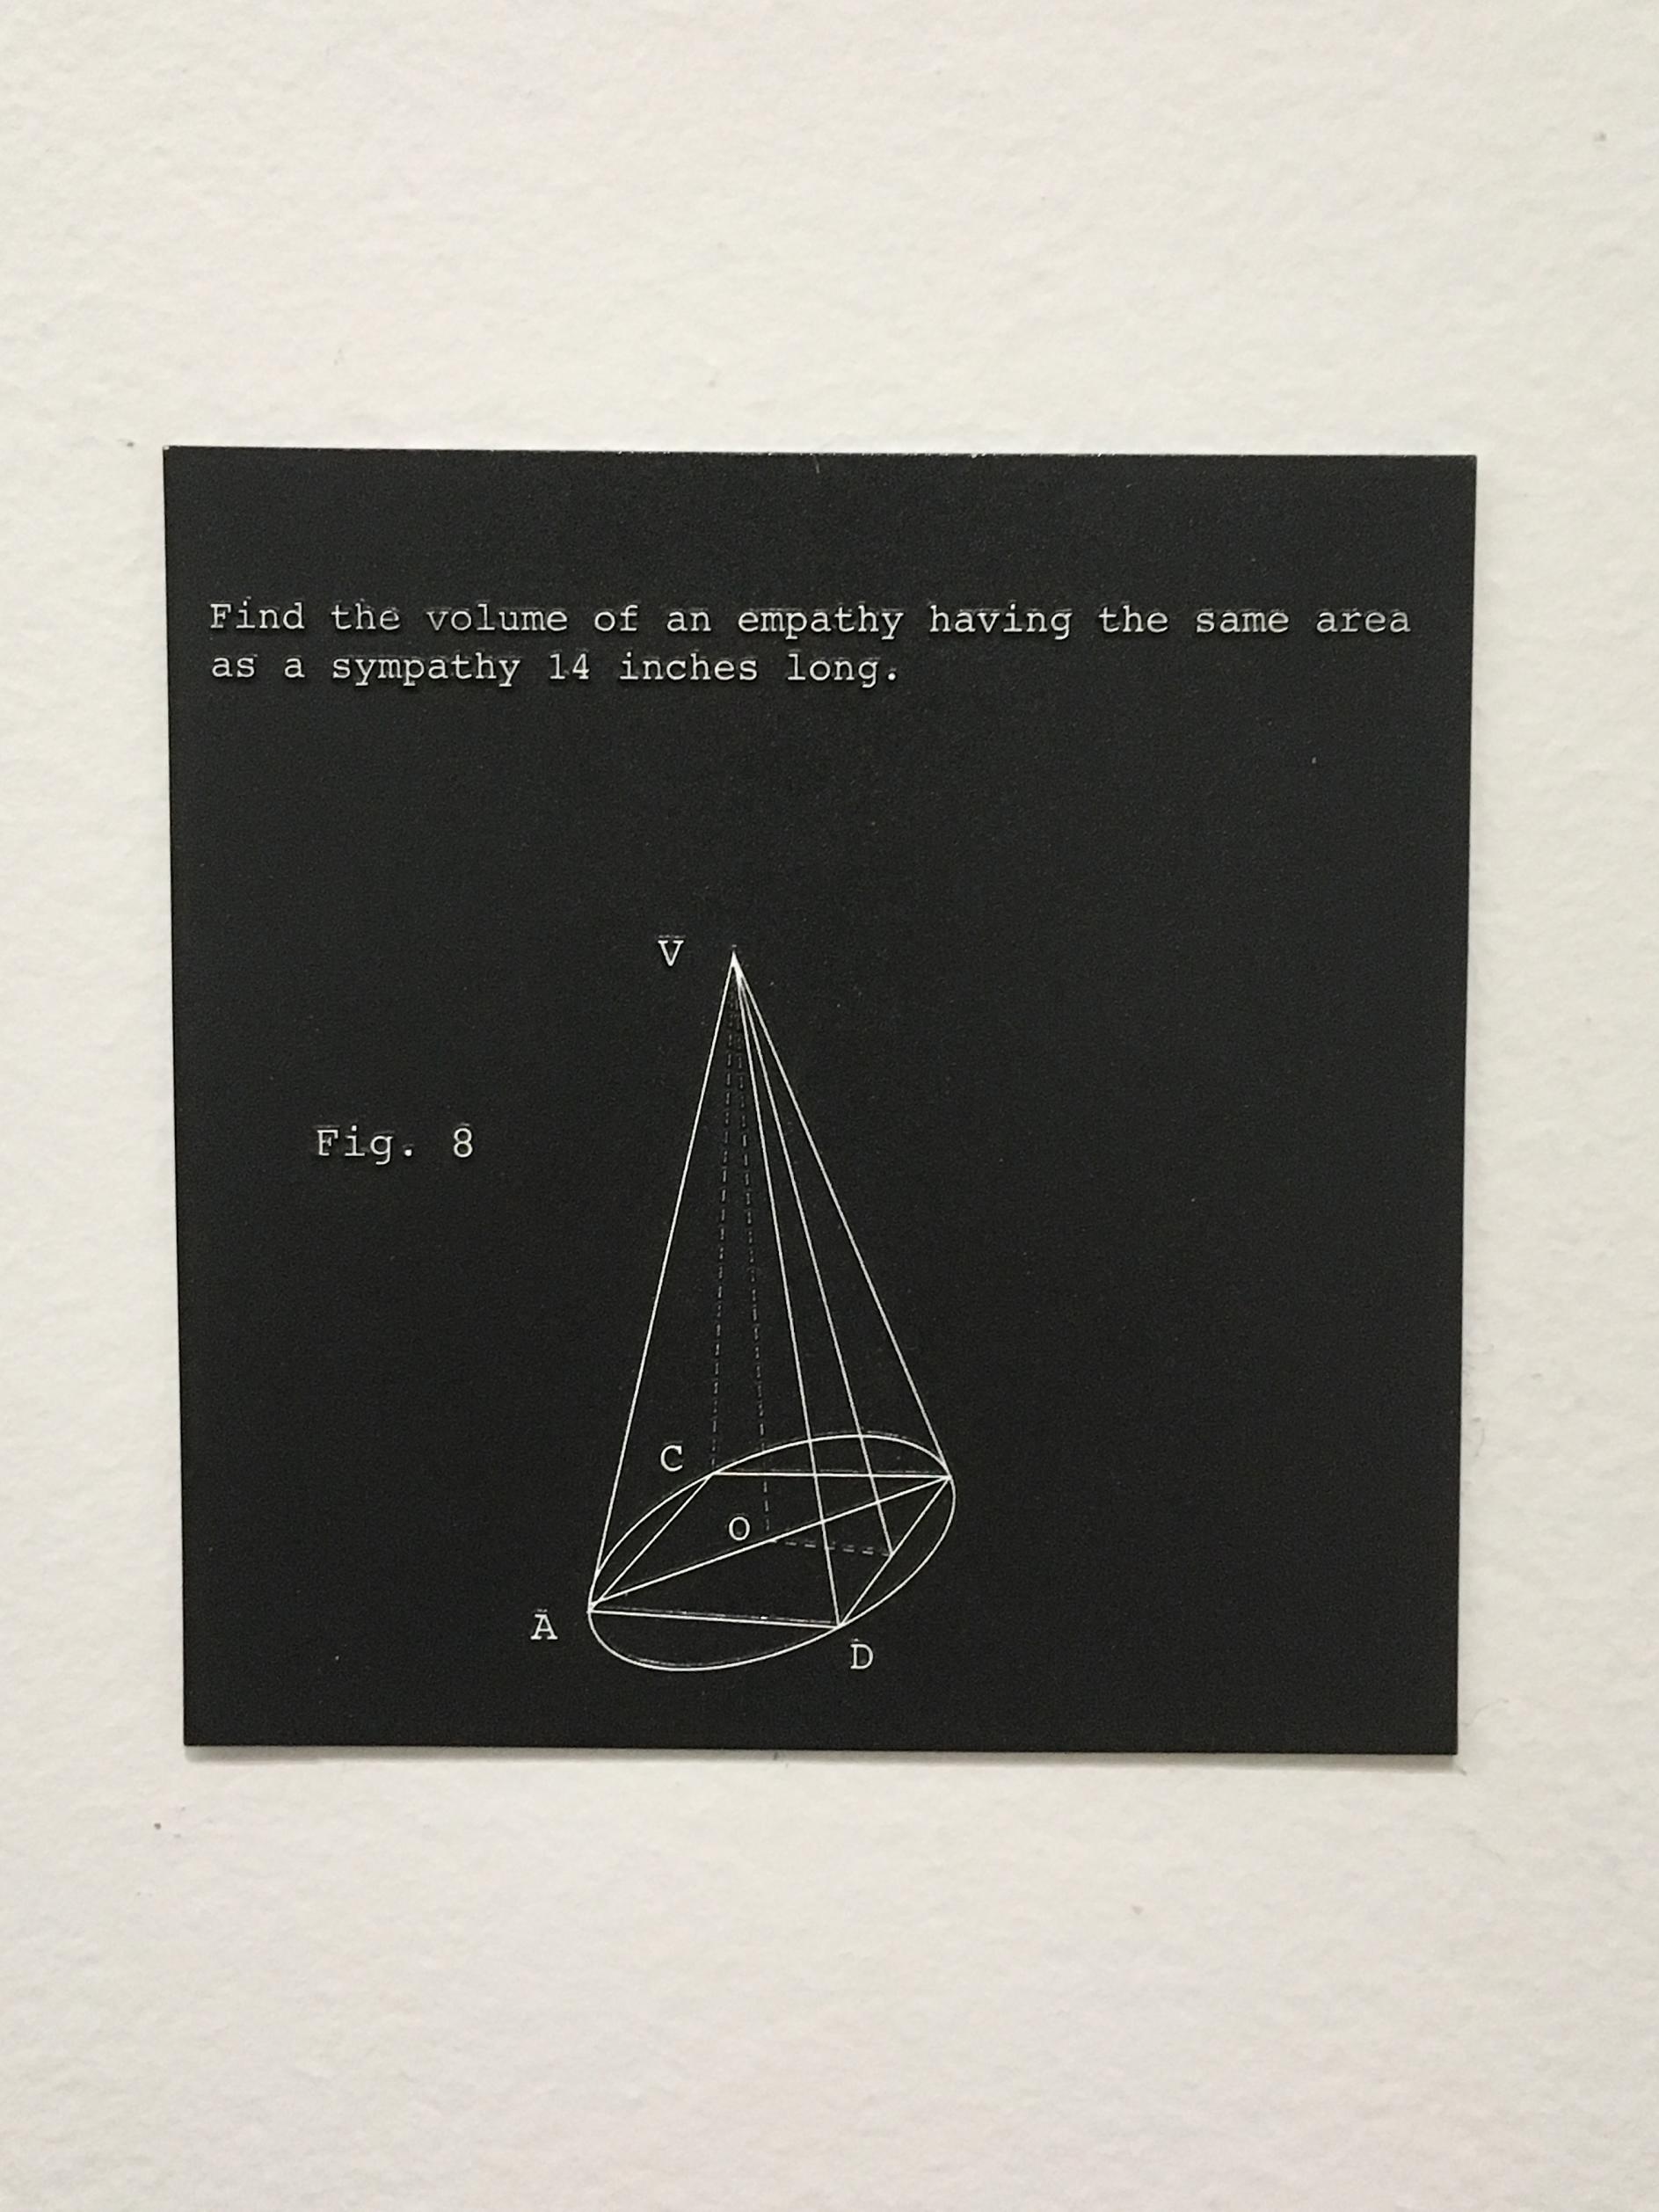 An interesting piece in the MOCA, the artist took mathematical equations to serve as a metaphor for ways to "solve" problems